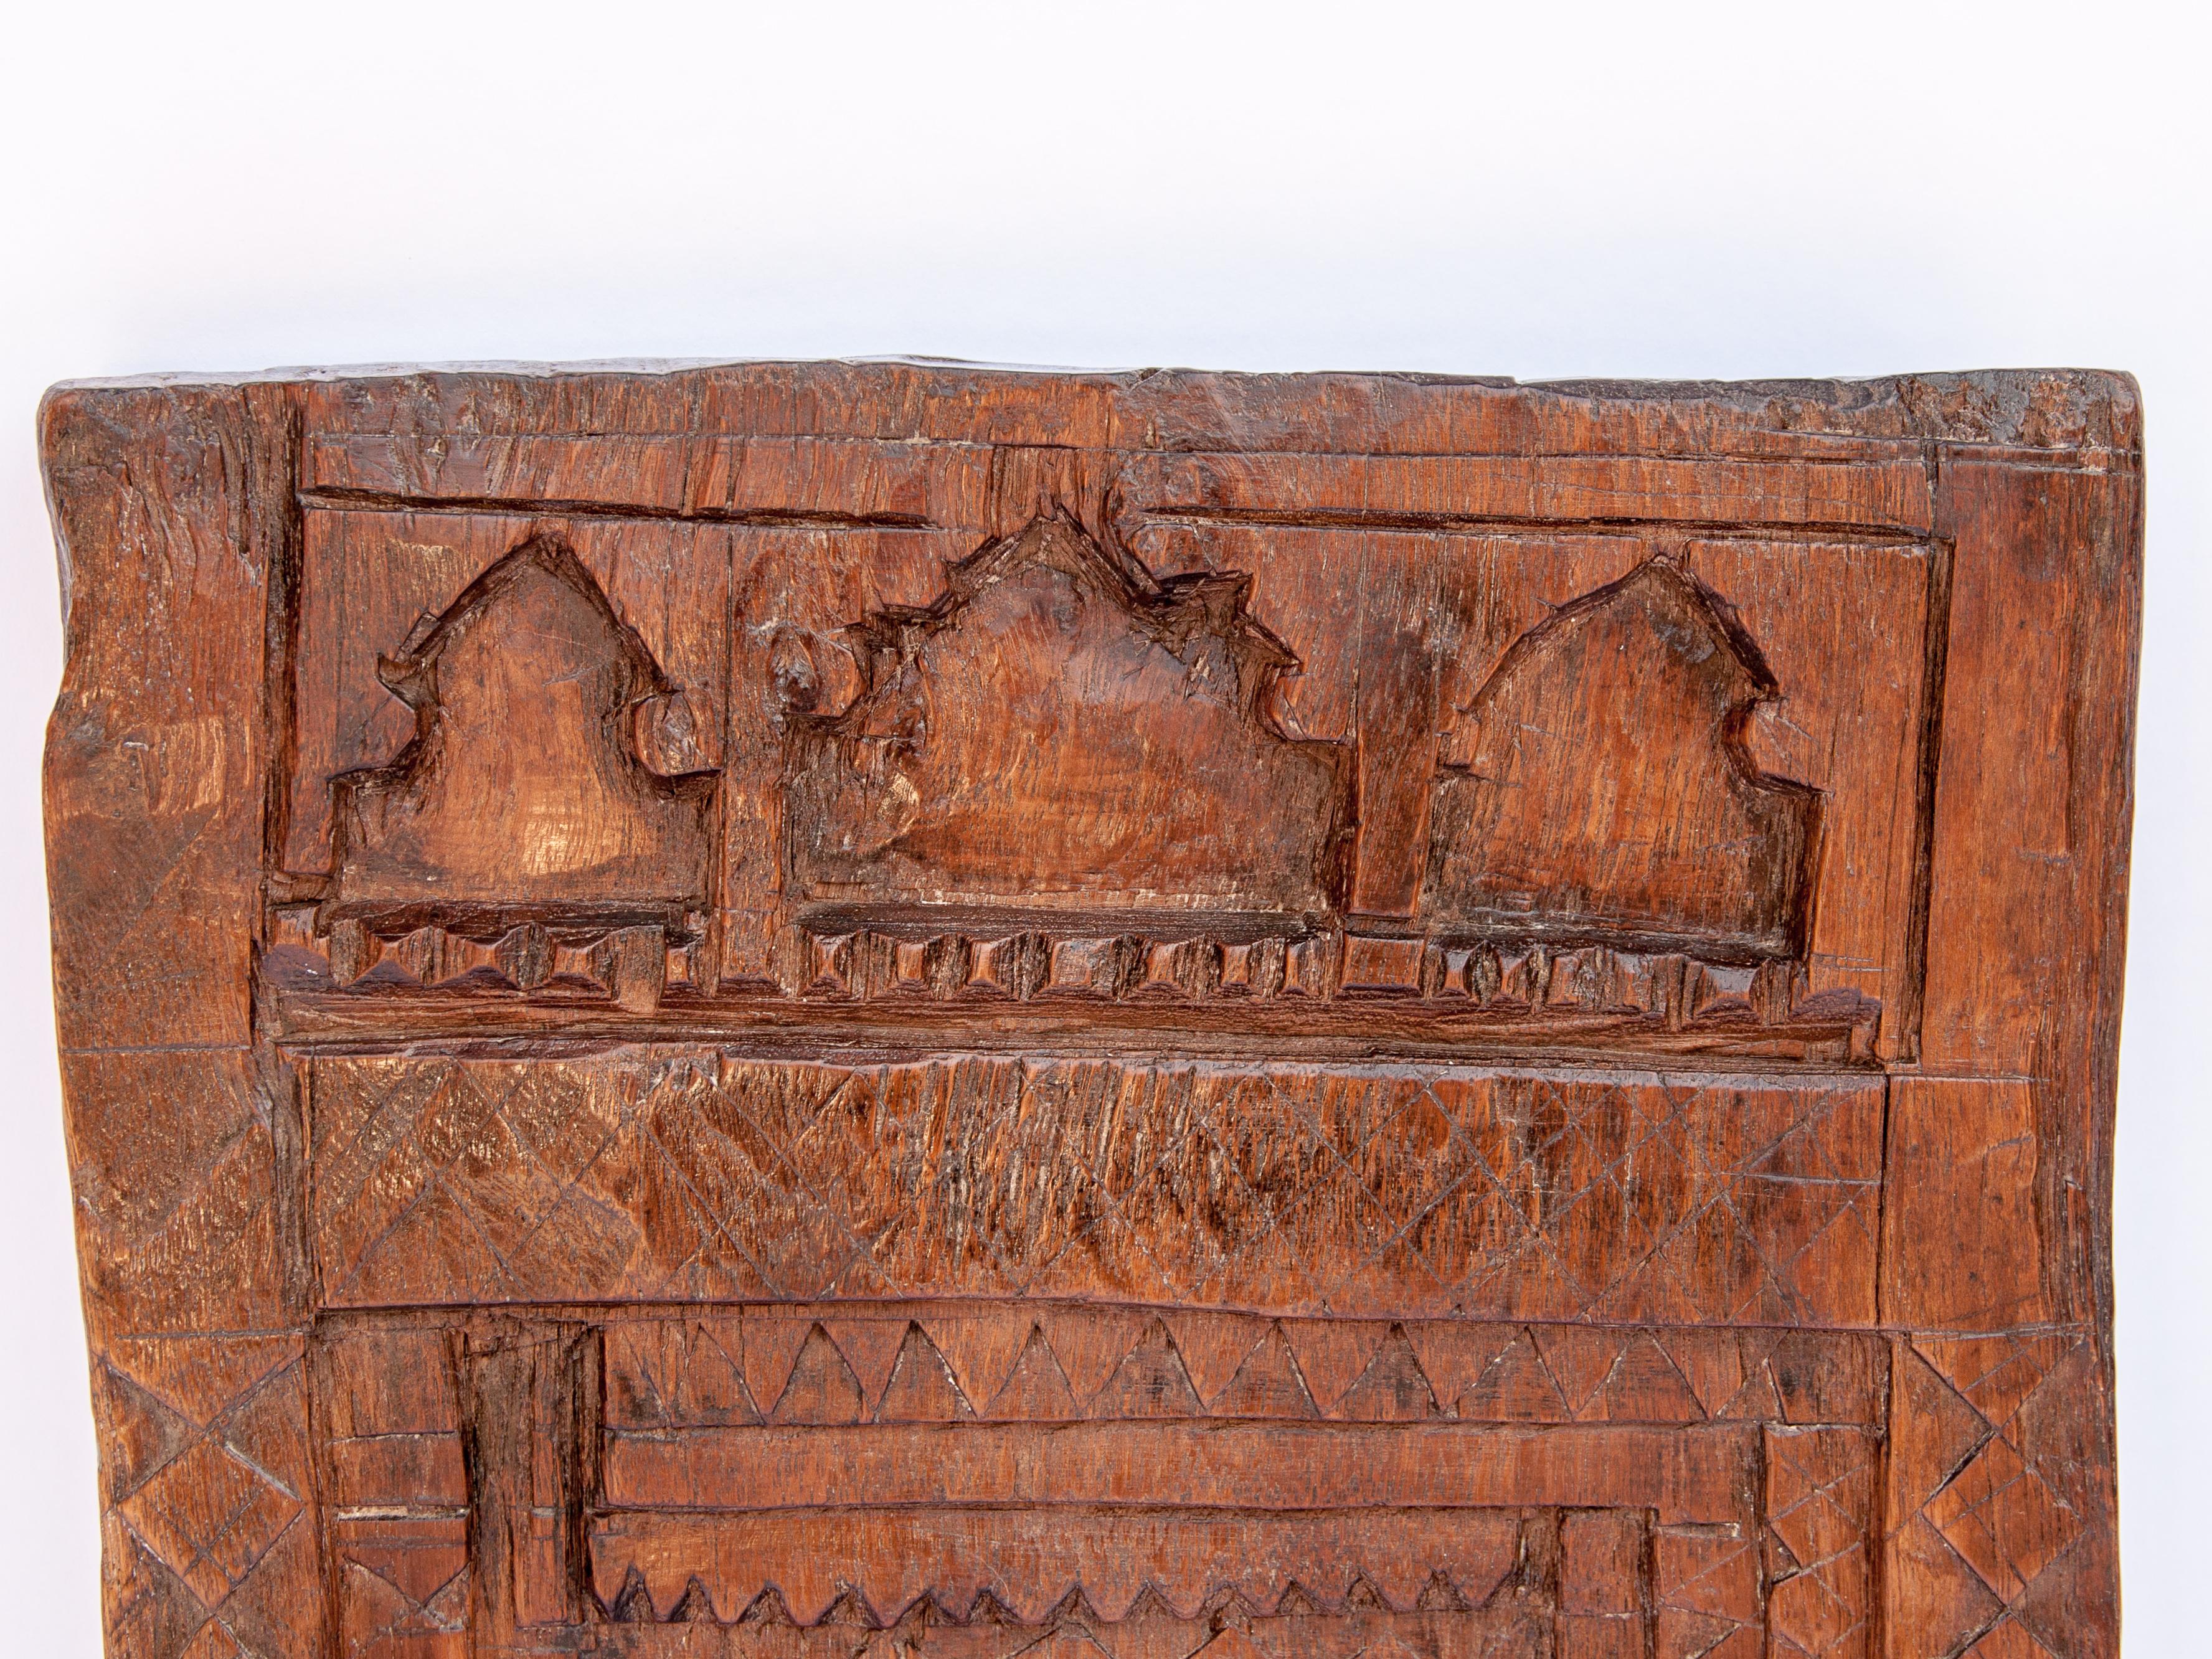 Vintage miniature architectural votive or picture frame. Mid-20th century, India. Wooden, hand carved, mid-20th century. Measures approx: 10.25 inches wide x 15.75 inches high. 
Please note that the display stand shown in several of the photos is